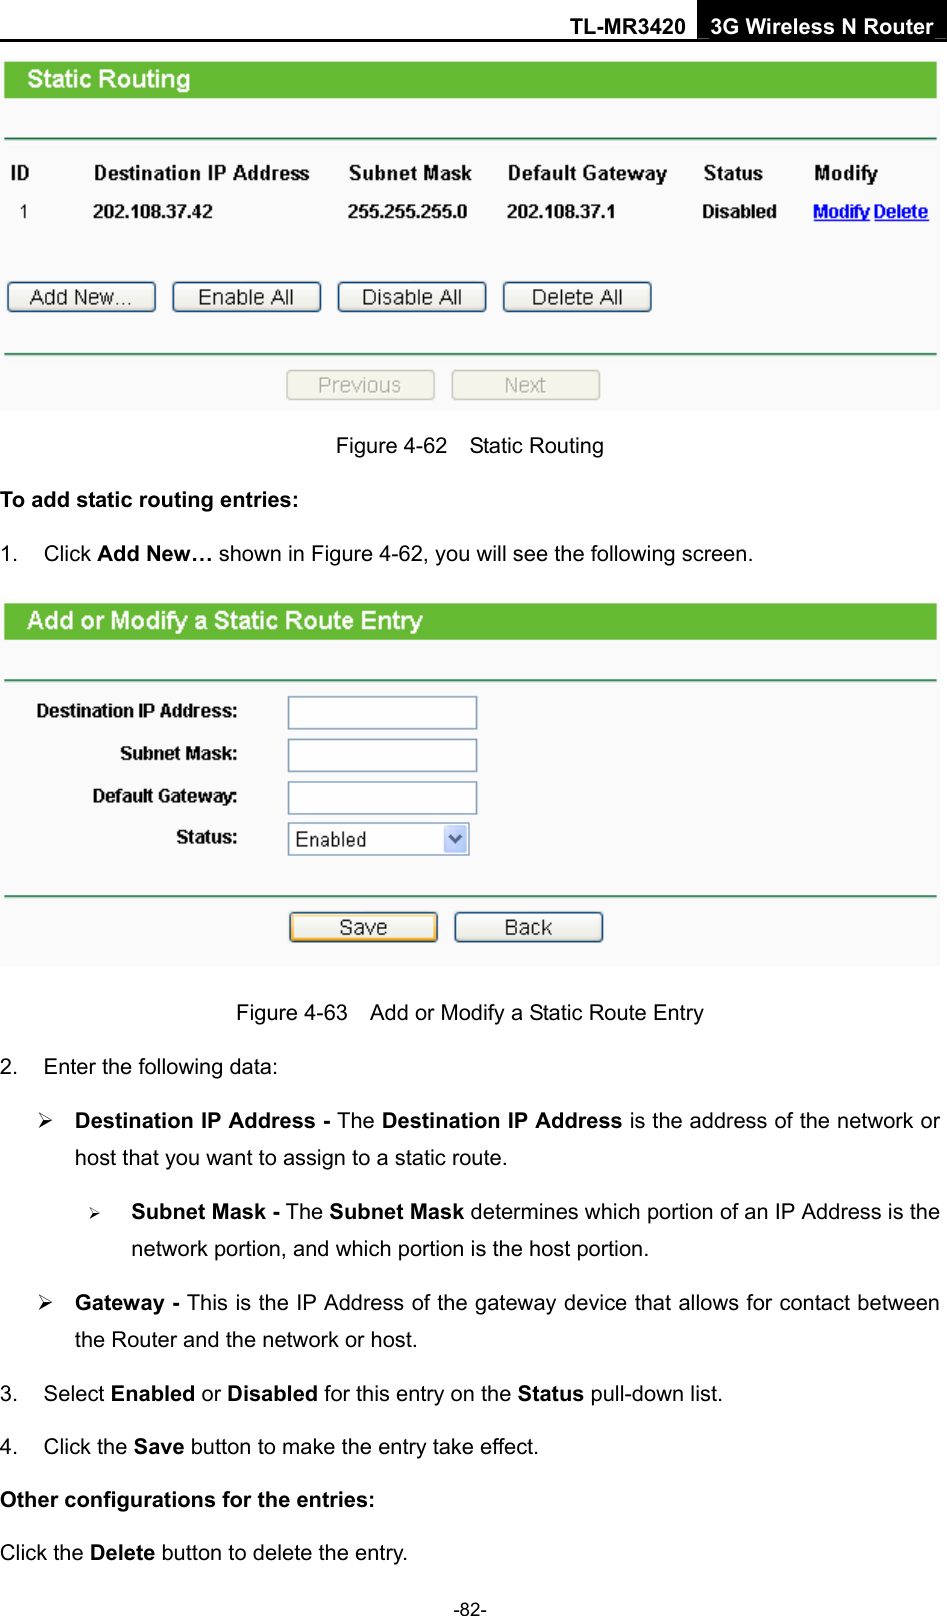 TL-MR3420 3G Wireless N Router -82-  Figure 4-62  Static Routing To add static routing entries: 1. Click Add New… shown in Figure 4-62, you will see the following screen.  Figure 4-63    Add or Modify a Static Route Entry 2.  Enter the following data: ¾ Destination IP Address - The Destination IP Address is the address of the network or host that you want to assign to a static route. ¾ Subnet Mask - The Subnet Mask determines which portion of an IP Address is the network portion, and which portion is the host portion. ¾ Gateway - This is the IP Address of the gateway device that allows for contact between the Router and the network or host. 3. Select Enabled or Disabled for this entry on the Status pull-down list. 4. Click the Save button to make the entry take effect. Other configurations for the entries: Click the Delete button to delete the entry. 